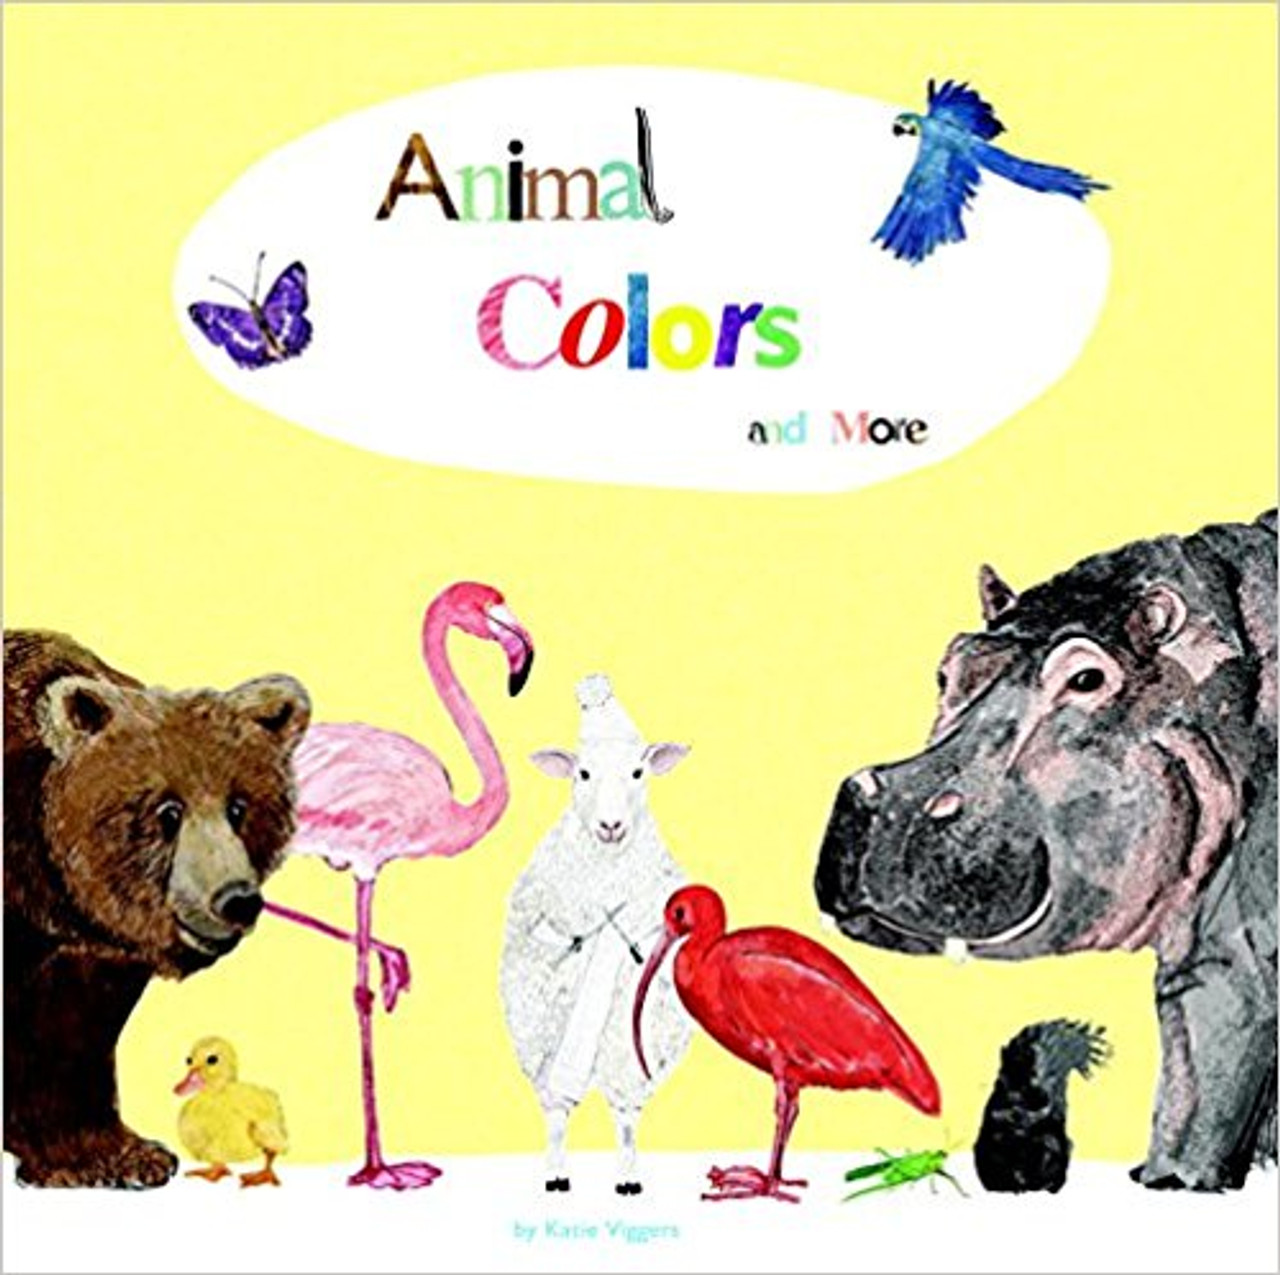 Animal Colors and More is the third book in Katie's Animal series. Here a herd of friendly creatures teach children the different colors and patterns found in the animal world. Charming, vivid illustrations bring nature to life with both realism and whimsy. Keep an eye out for a few cheeky animals that are trying to trick you, see if you can work out who they are!